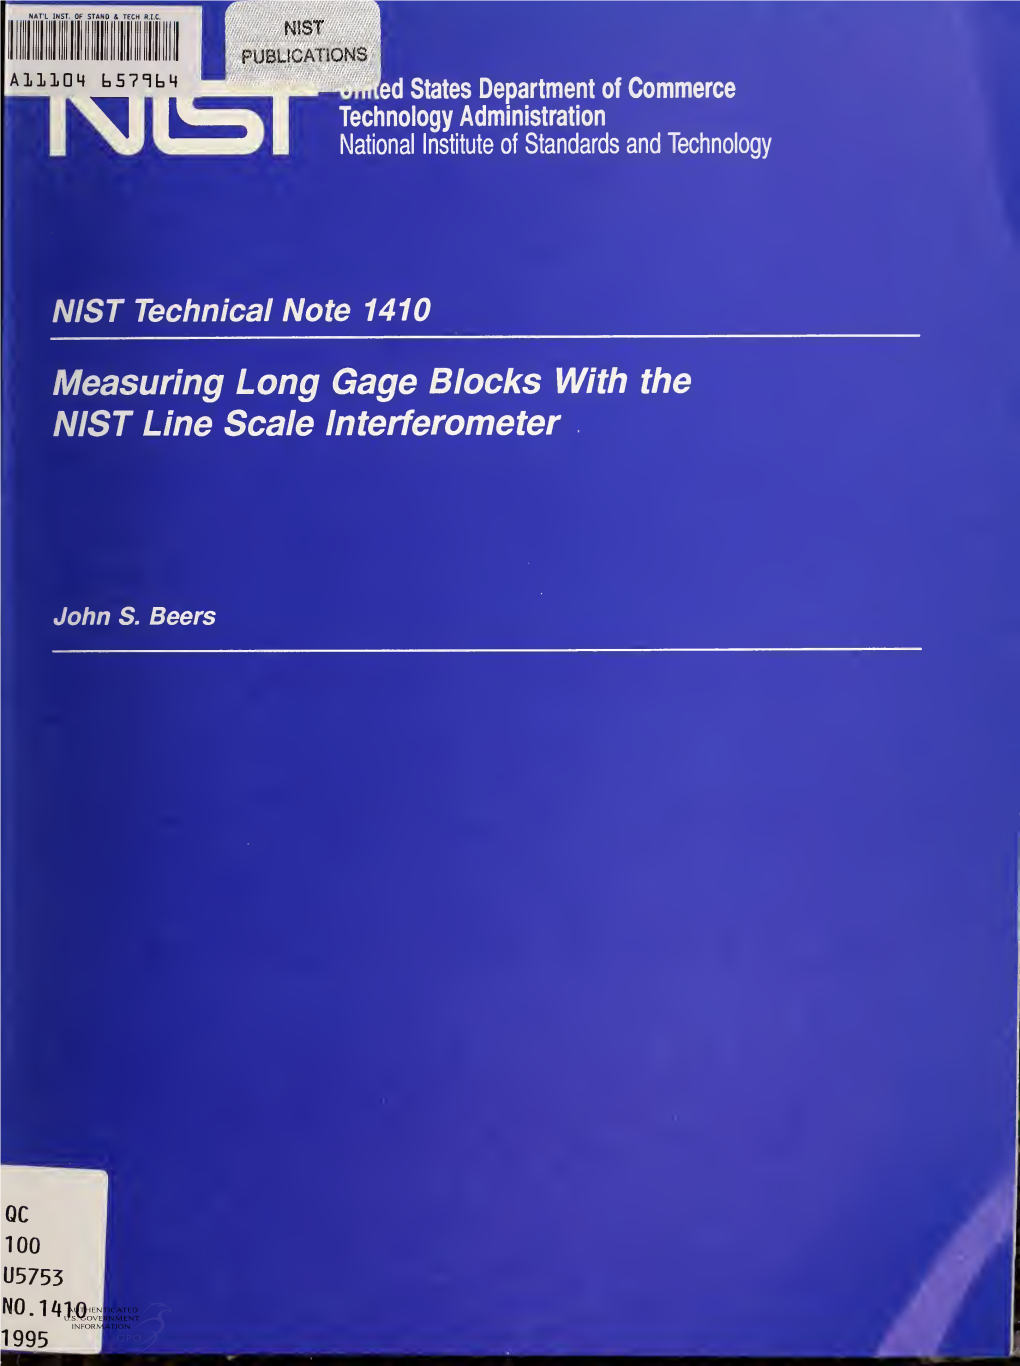 Measuring Long Gage Blocks with the NIST Line Scale Interferometer